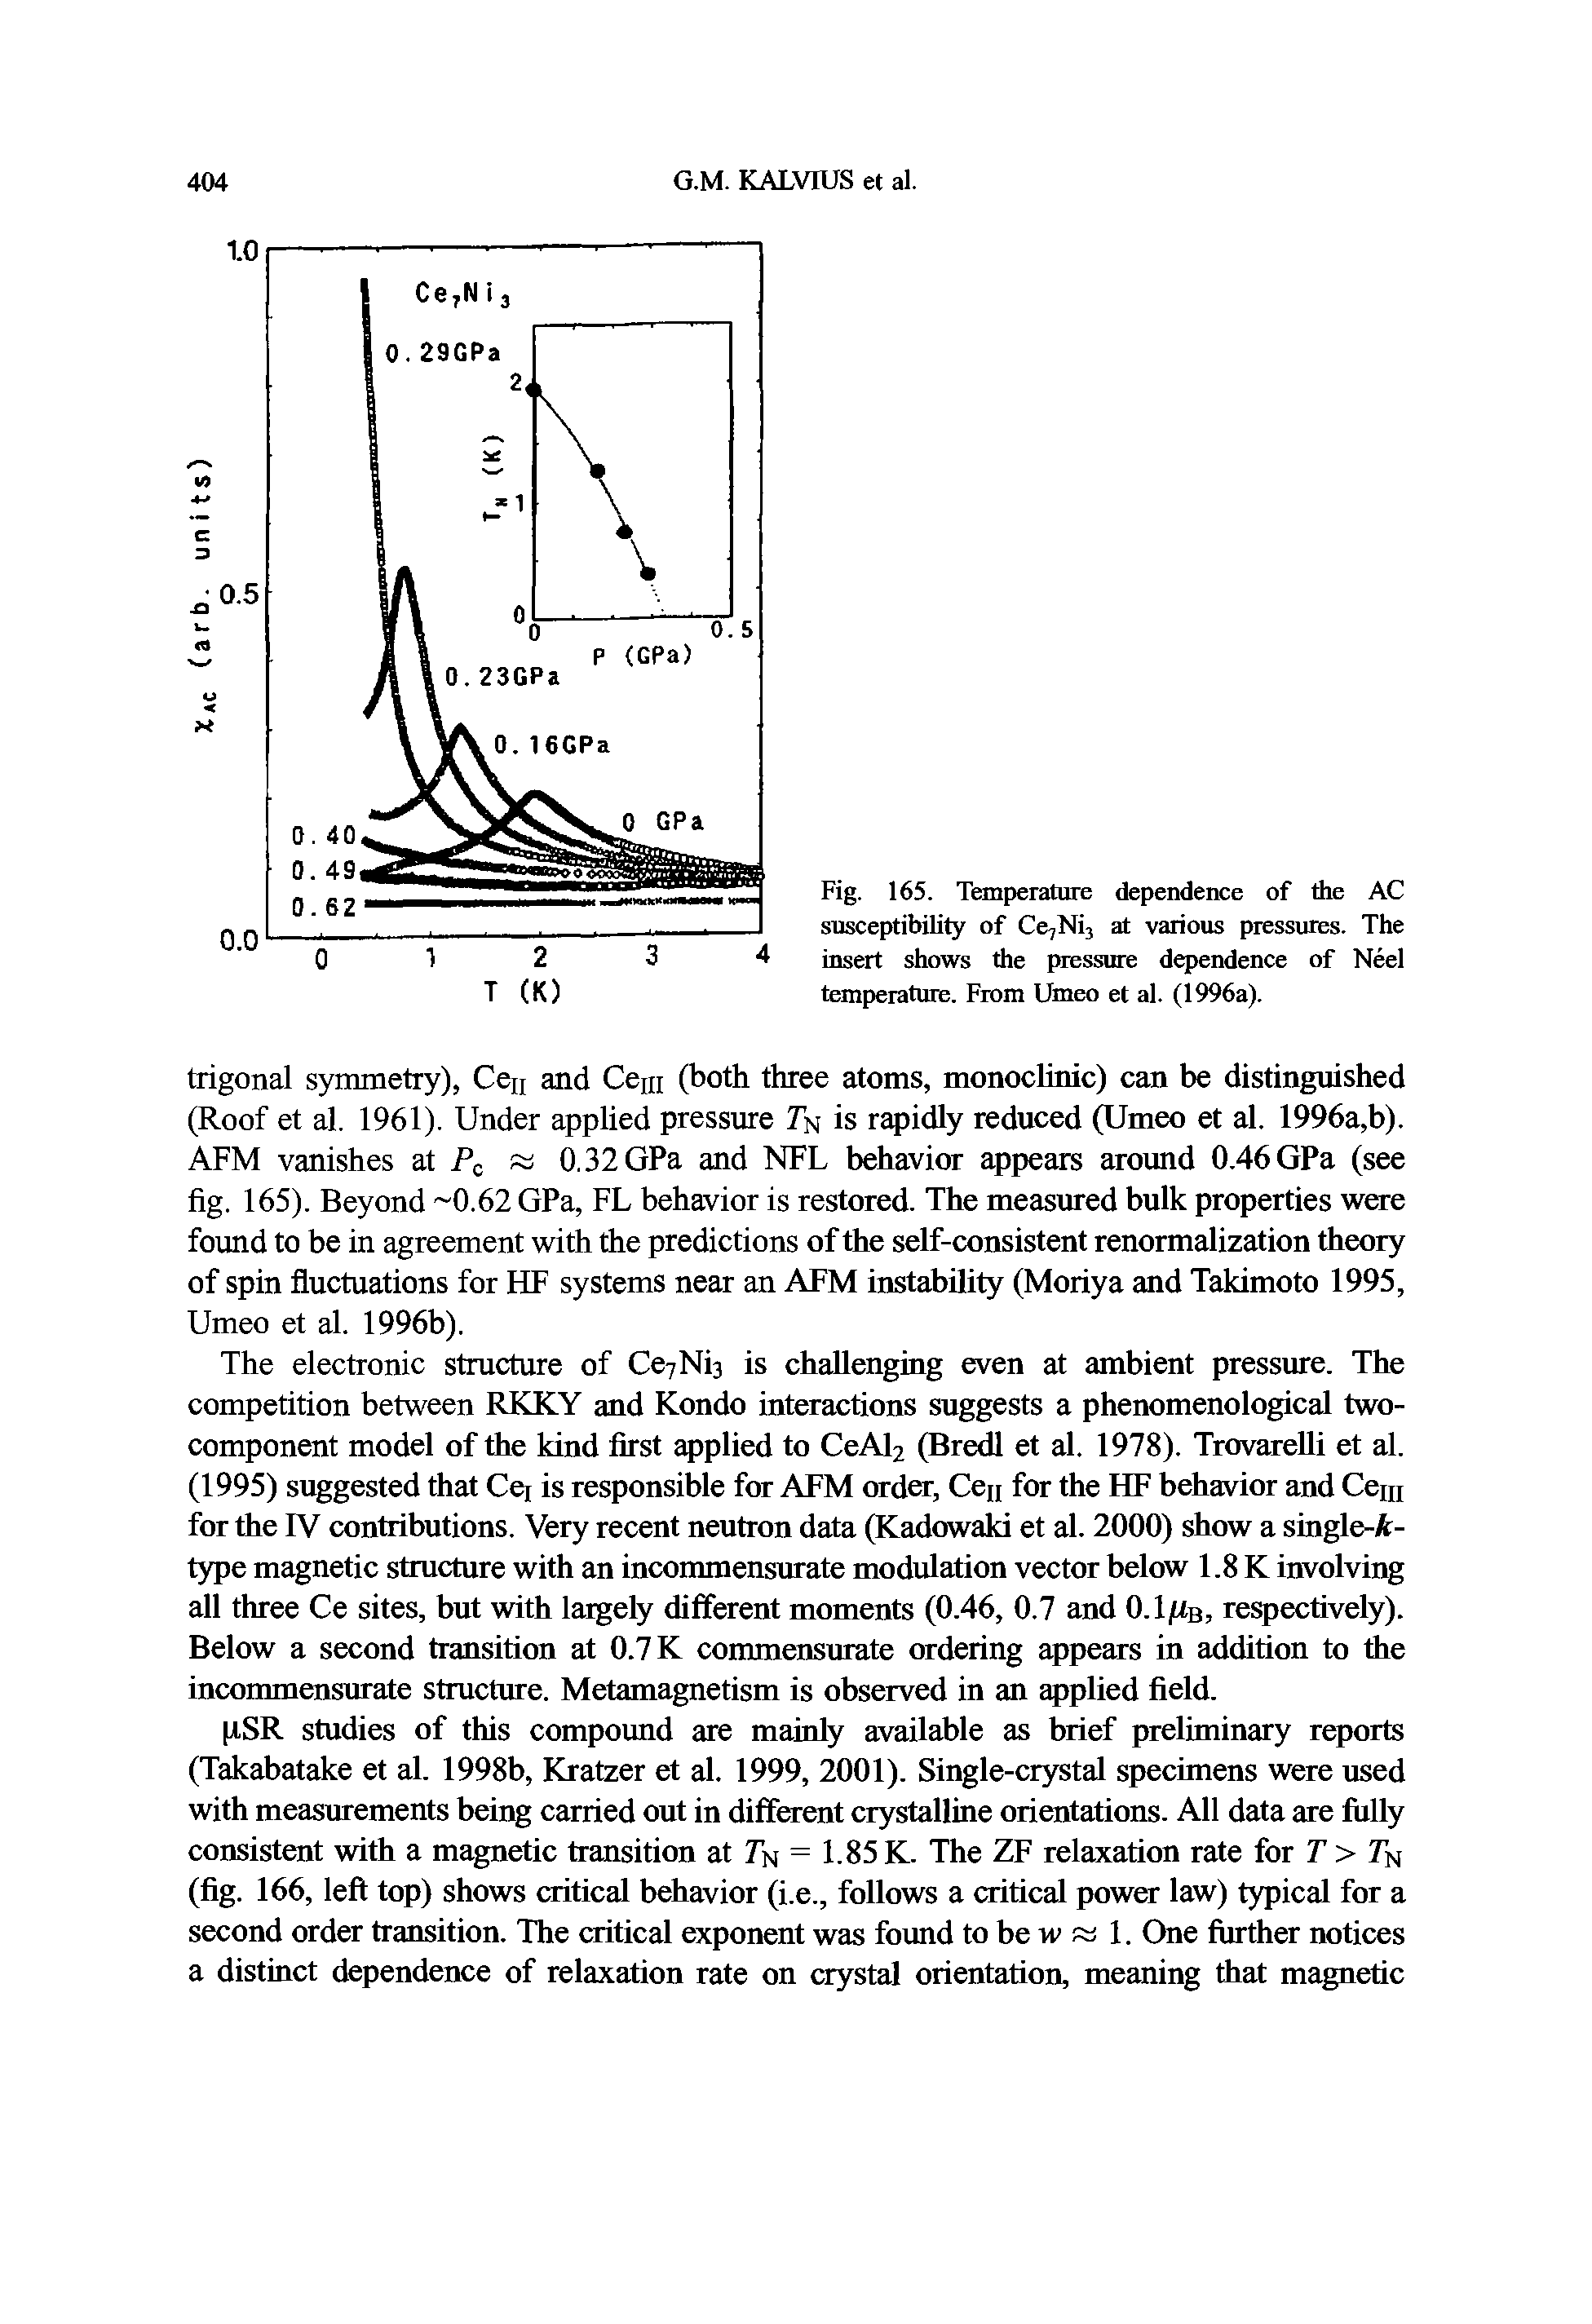 Fig. 165. Temperature dependence of the AC susceptibility of CcjNij at various pressures. The insert shows the pressure dependence of Neel temperature. From Umeo et al. (1996a).